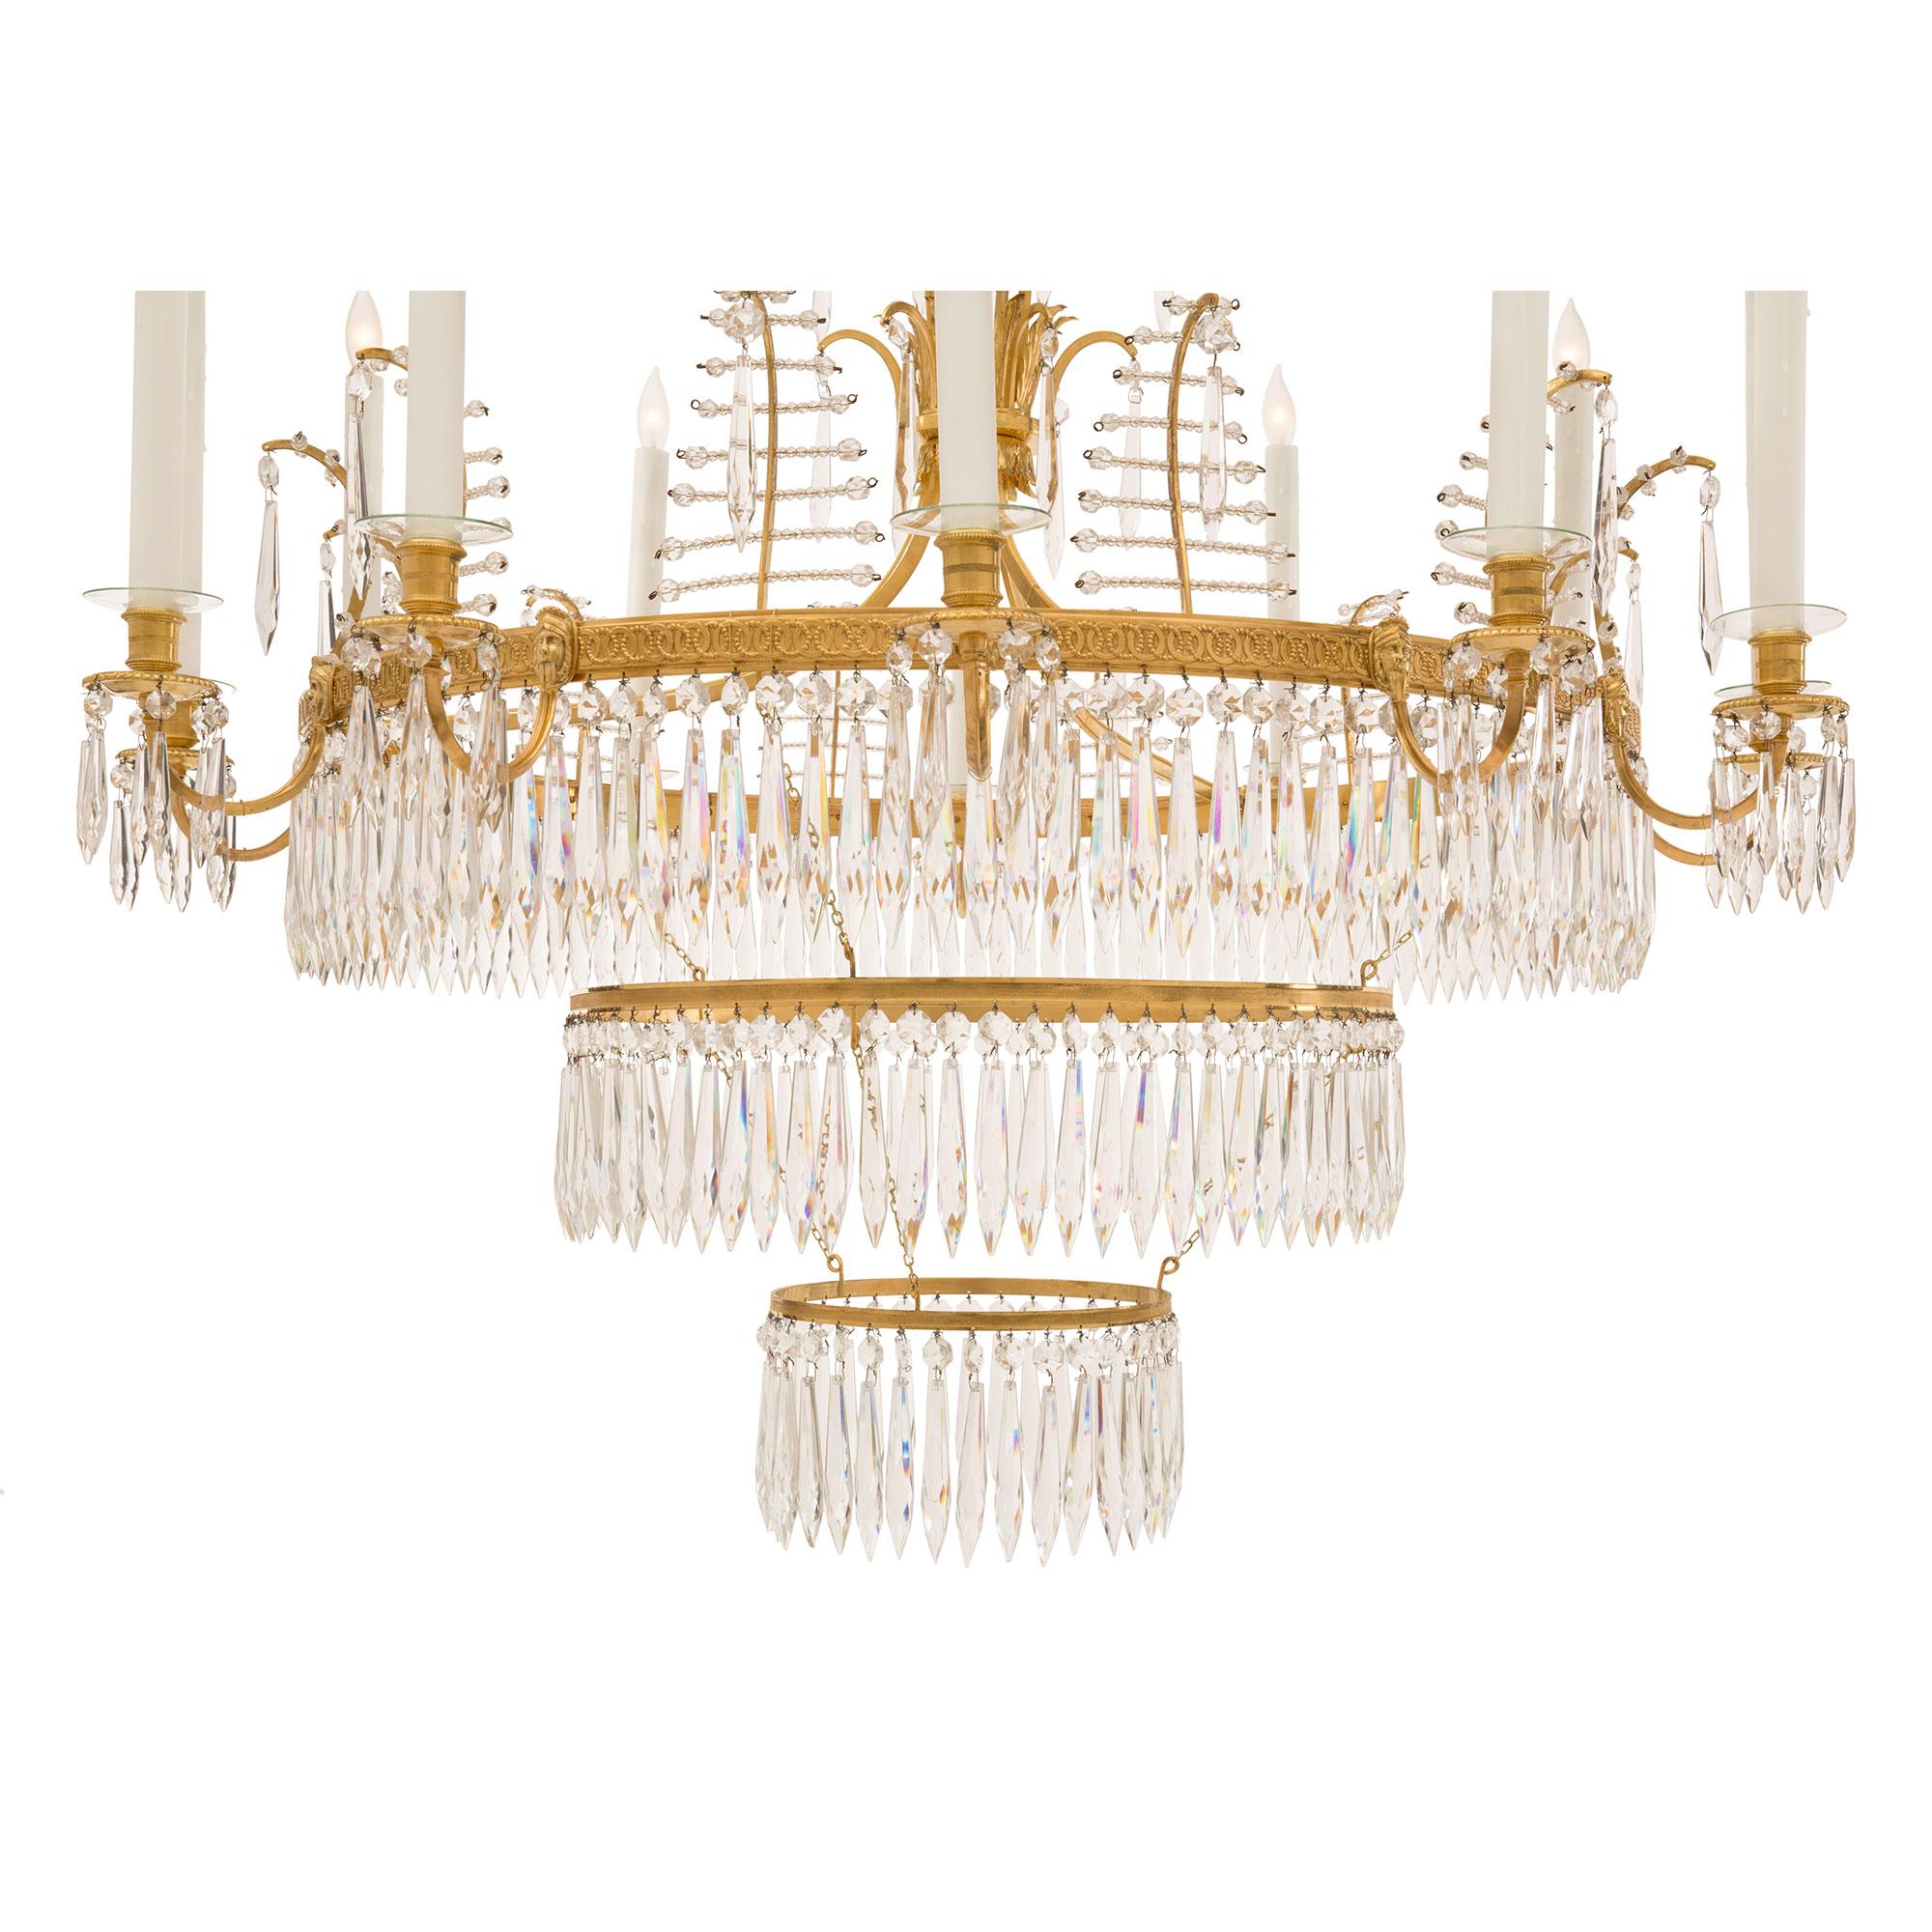 Russian Early 19th Century Neoclassical Style Ormolu and Crystal Chandelier For Sale 3